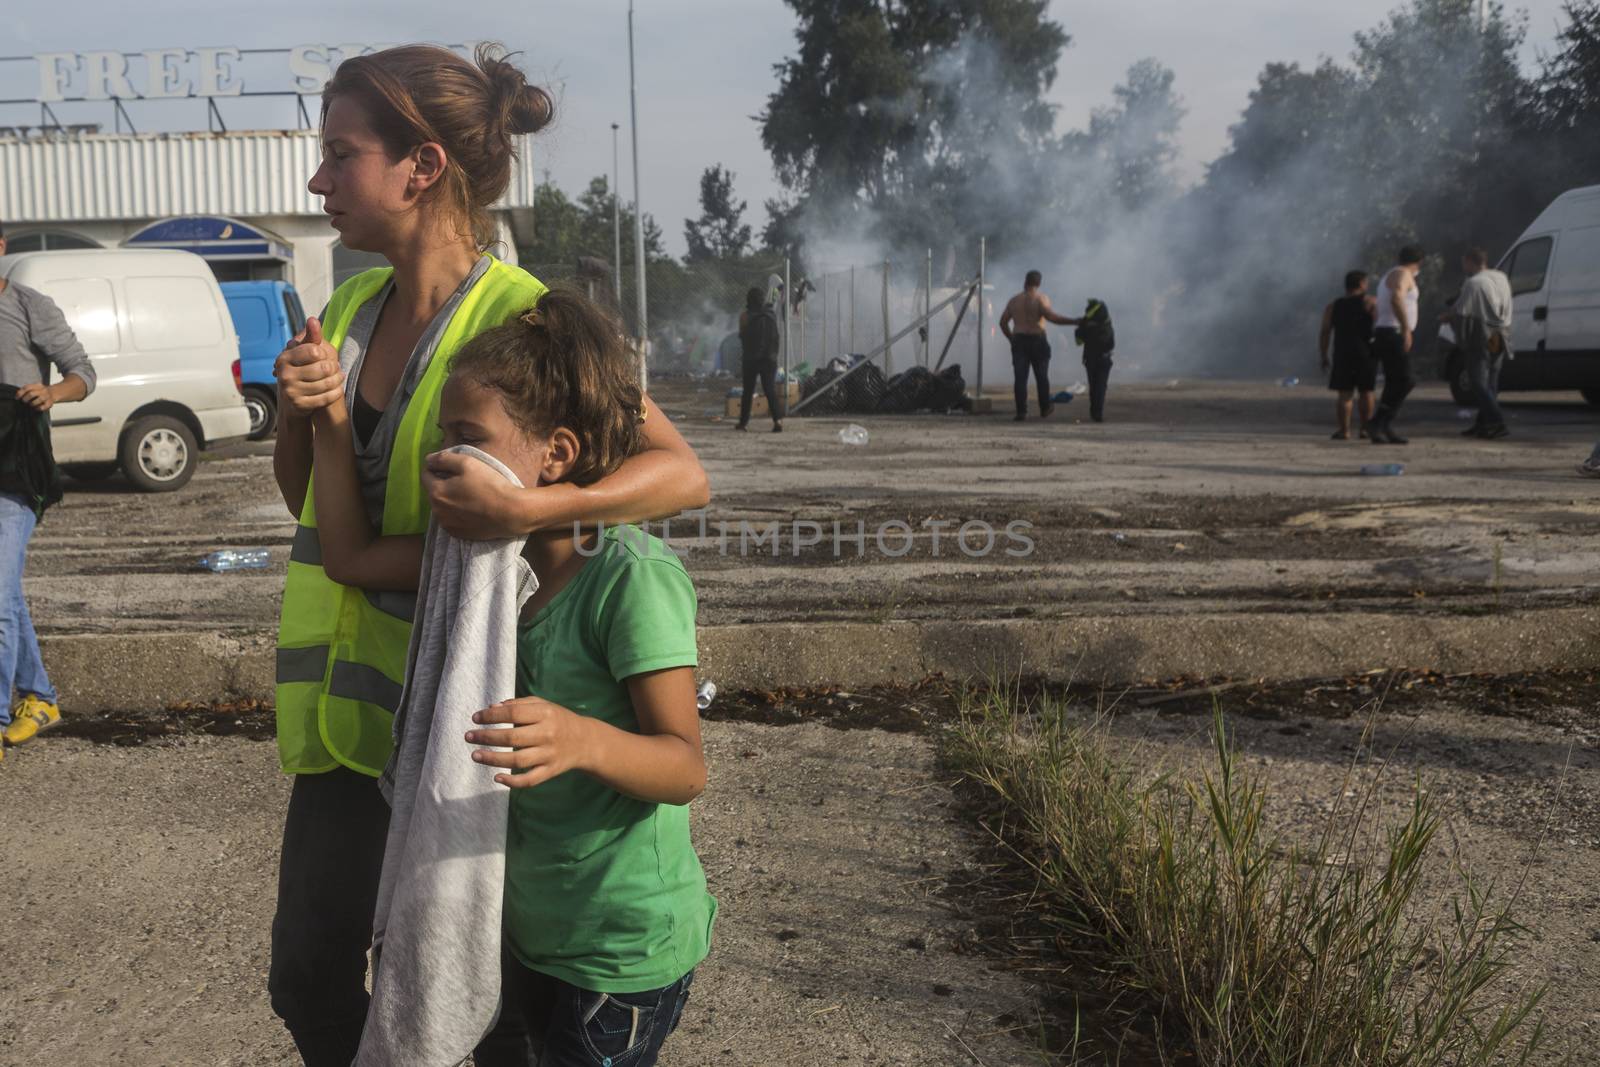 SERBIA, Horgos: A child's face is covered as Hungarian police fire tear gas and water cannons into the refugees in the Serbian border town of Horgos on September 16, 2015, after Hungary closed its border in an effort to stem the wave of refugees entering the country. 